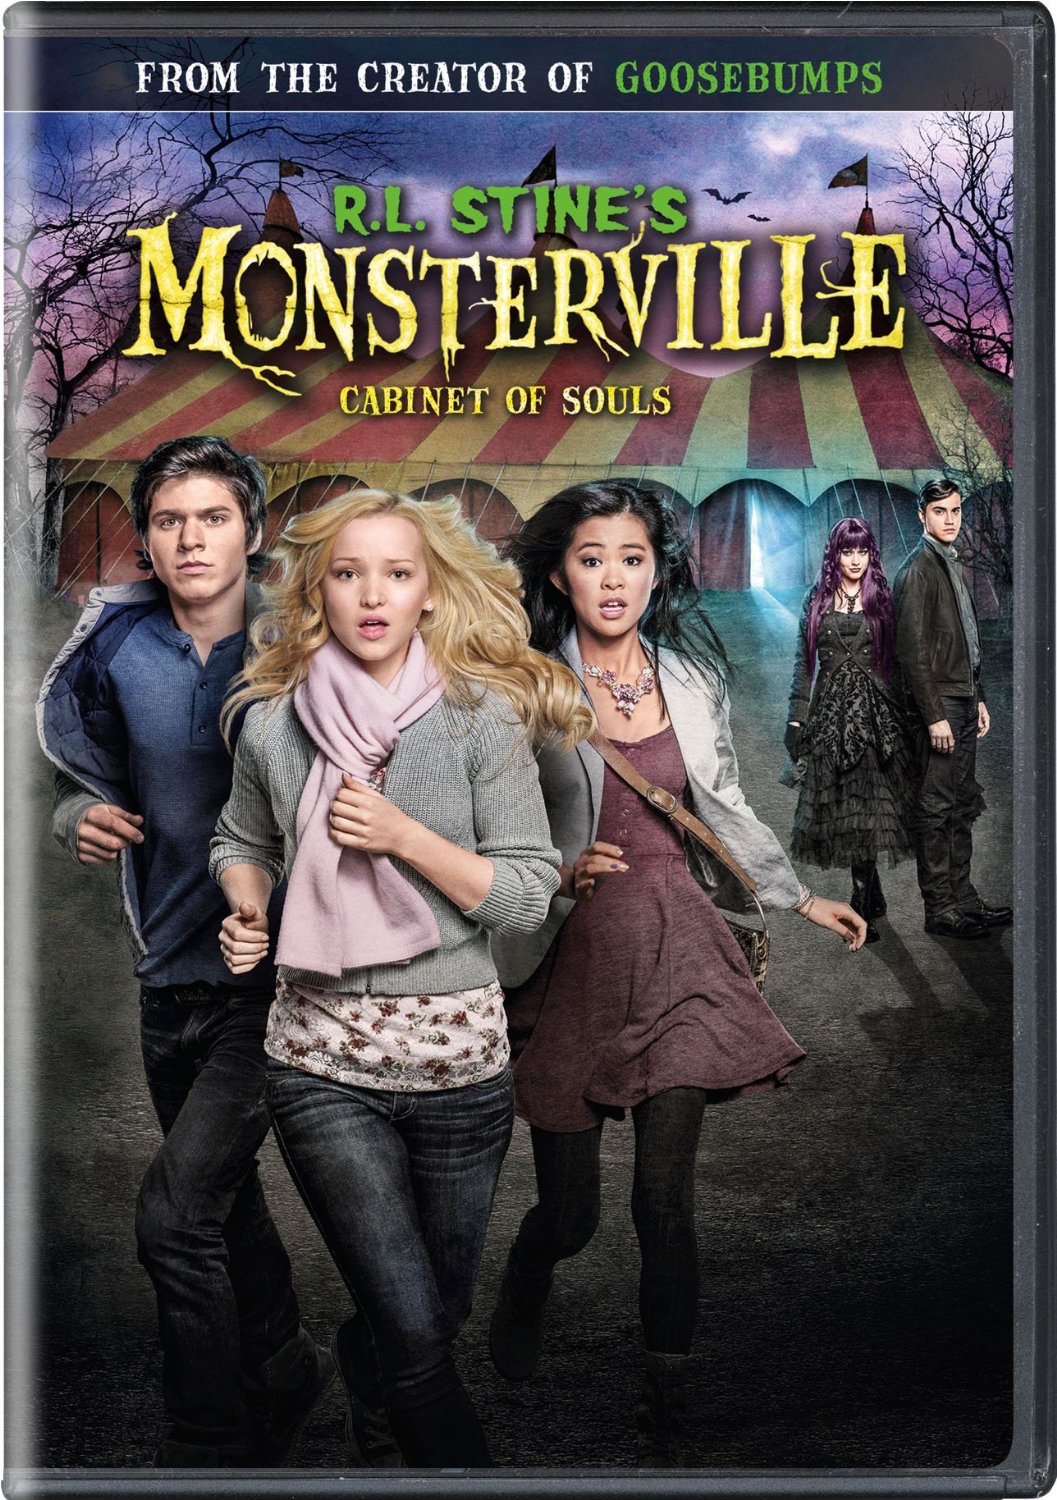 Monsterville Cabinet of Souls DVD Review